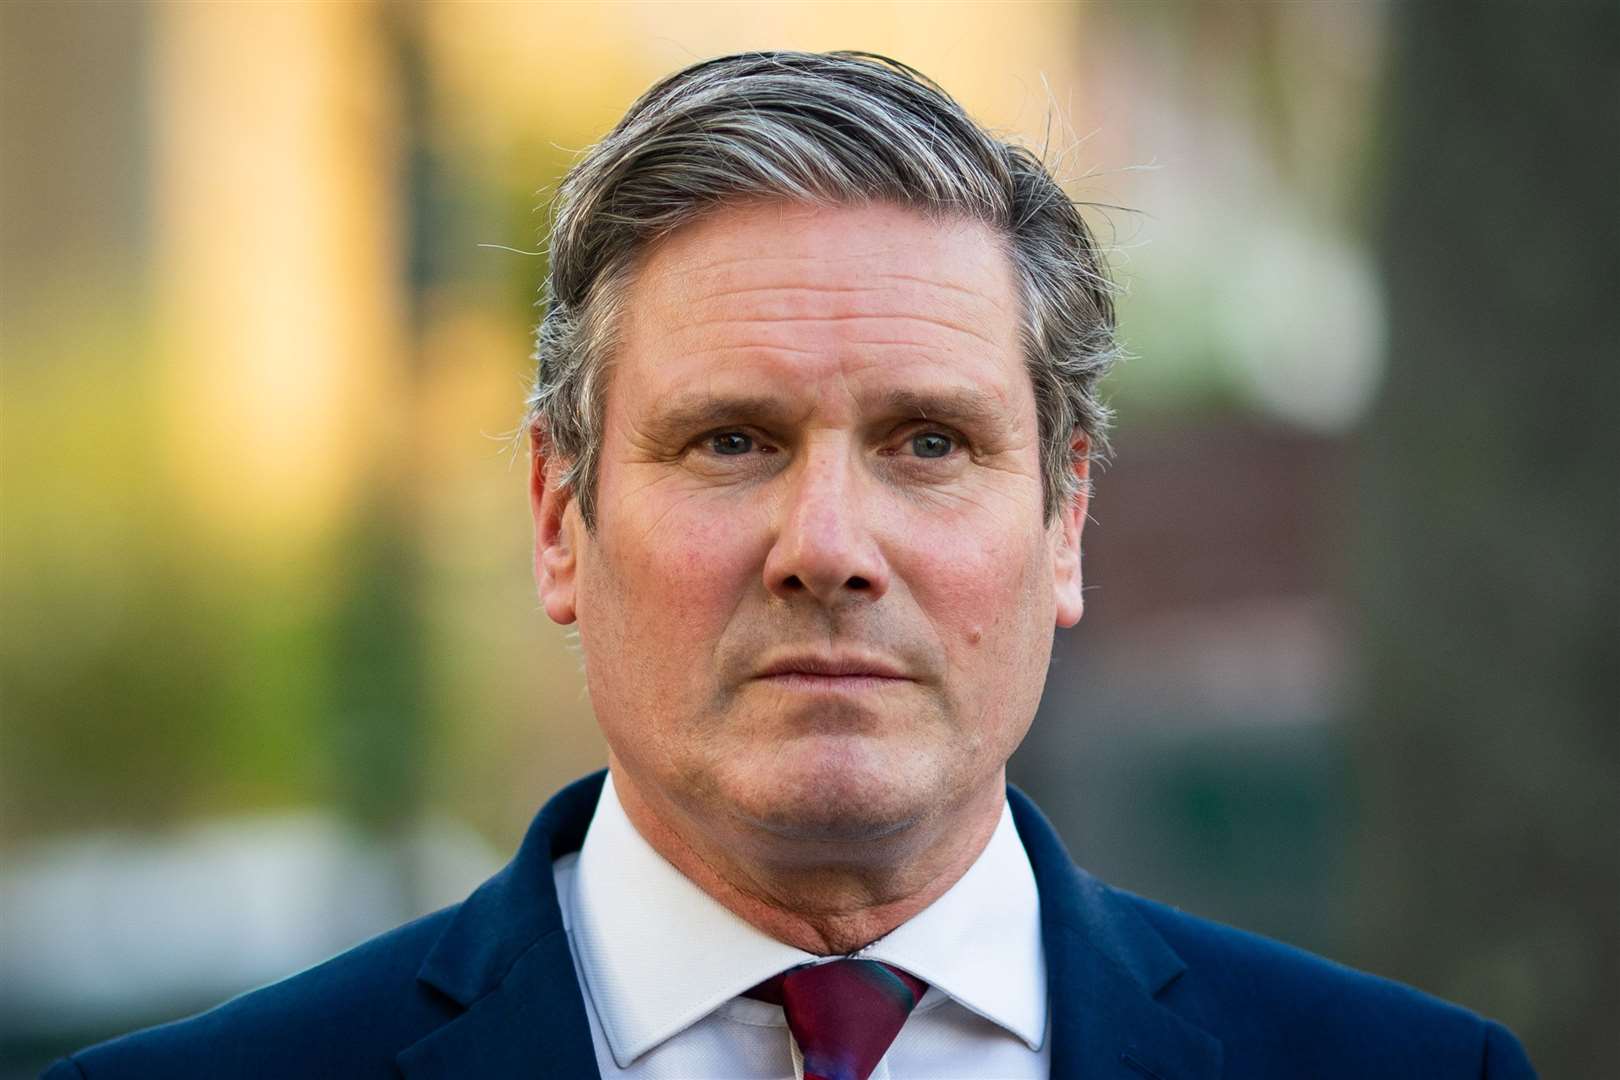 Labour leader Sir Keir Starmer believes the move to drop restrictions is "reckless"